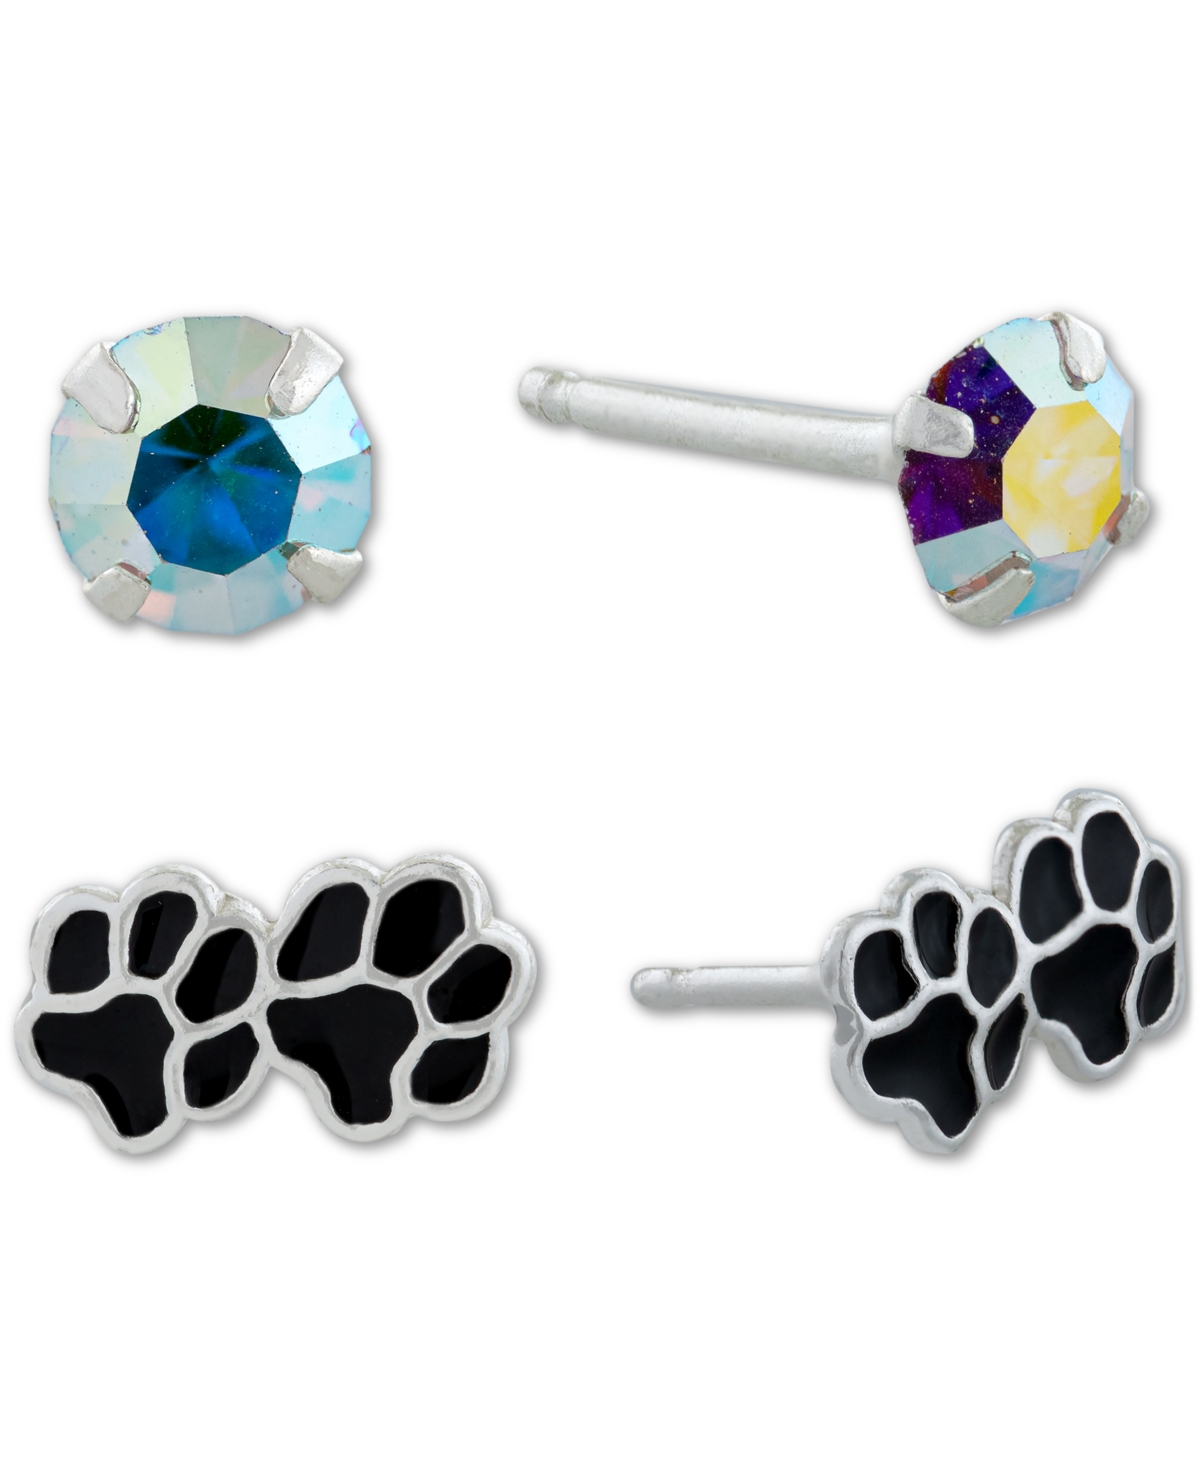 2-Pc. Set Crystal Solitaire & Pawprint Stud Earrings in Sterling Silver, Created for Macy's - Black/white